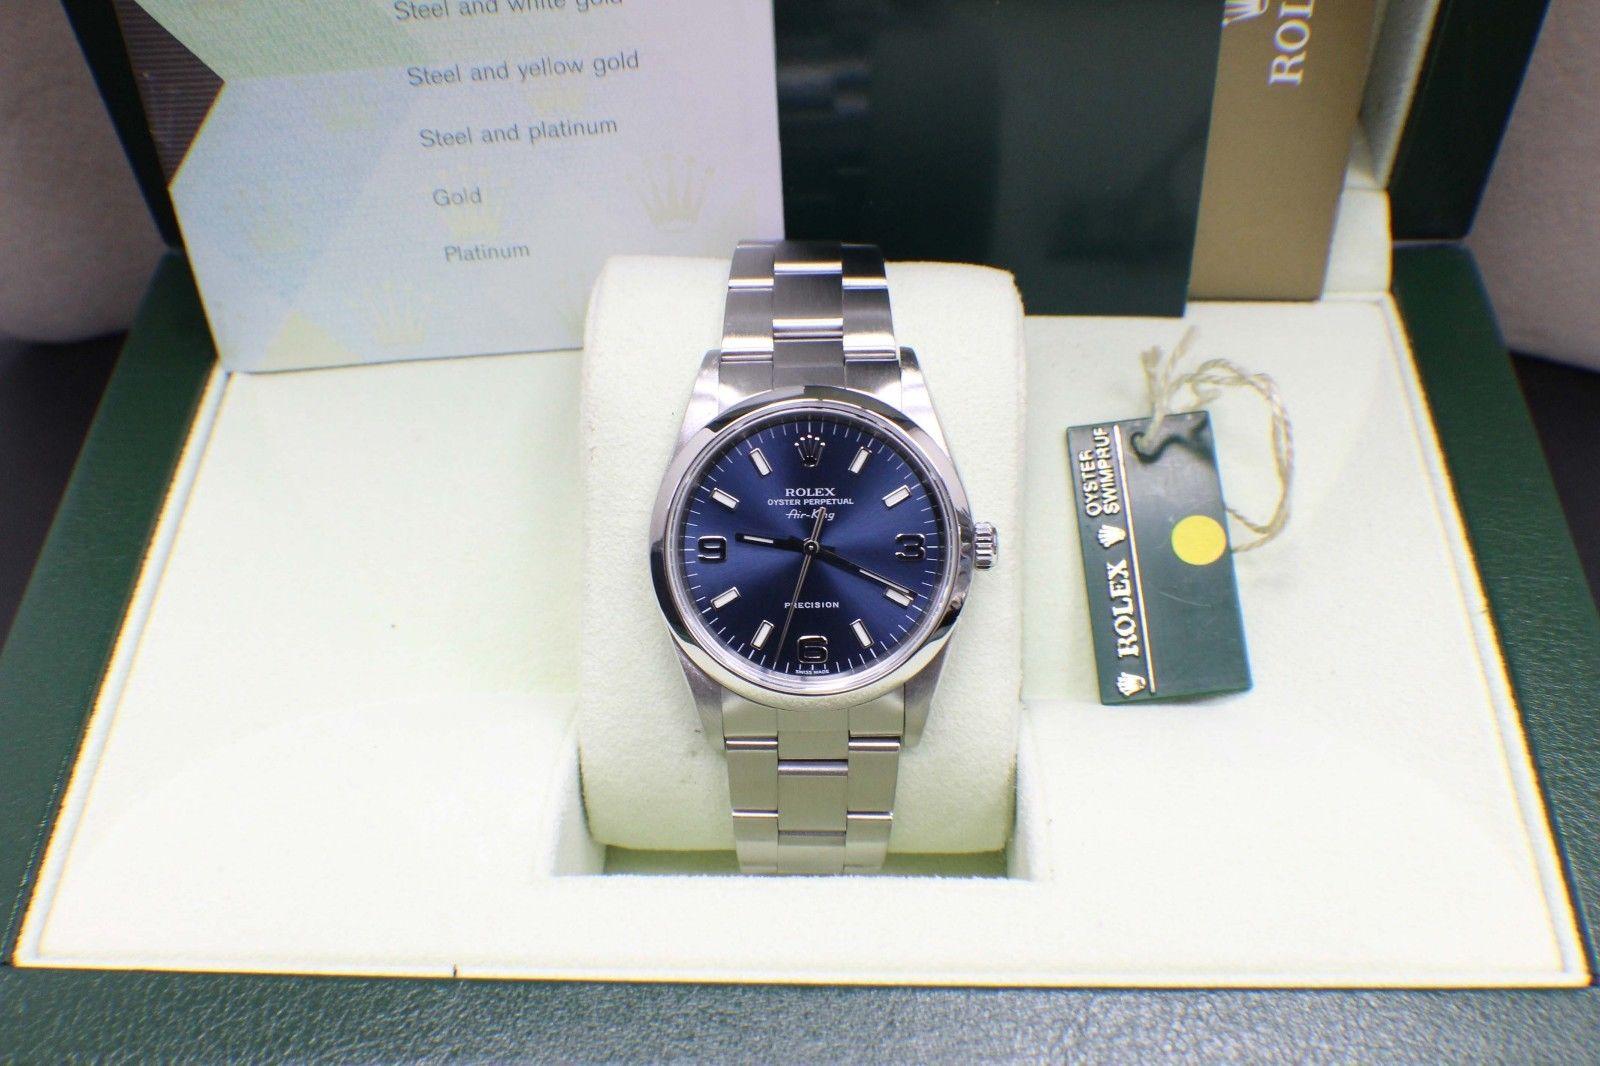 Style Number: 14000
Serial: Z419***
Year: 2007
Model: Air-King
Case Material: Stainless Steel
Band: Stainless Steel
Bezel: Stainless Steel
Dial: Blue
Face: Sapphire Crystal
Case Size: 34mm
Includes: 
-Rolex Box & Papers
-Certified Appraisal 
-6